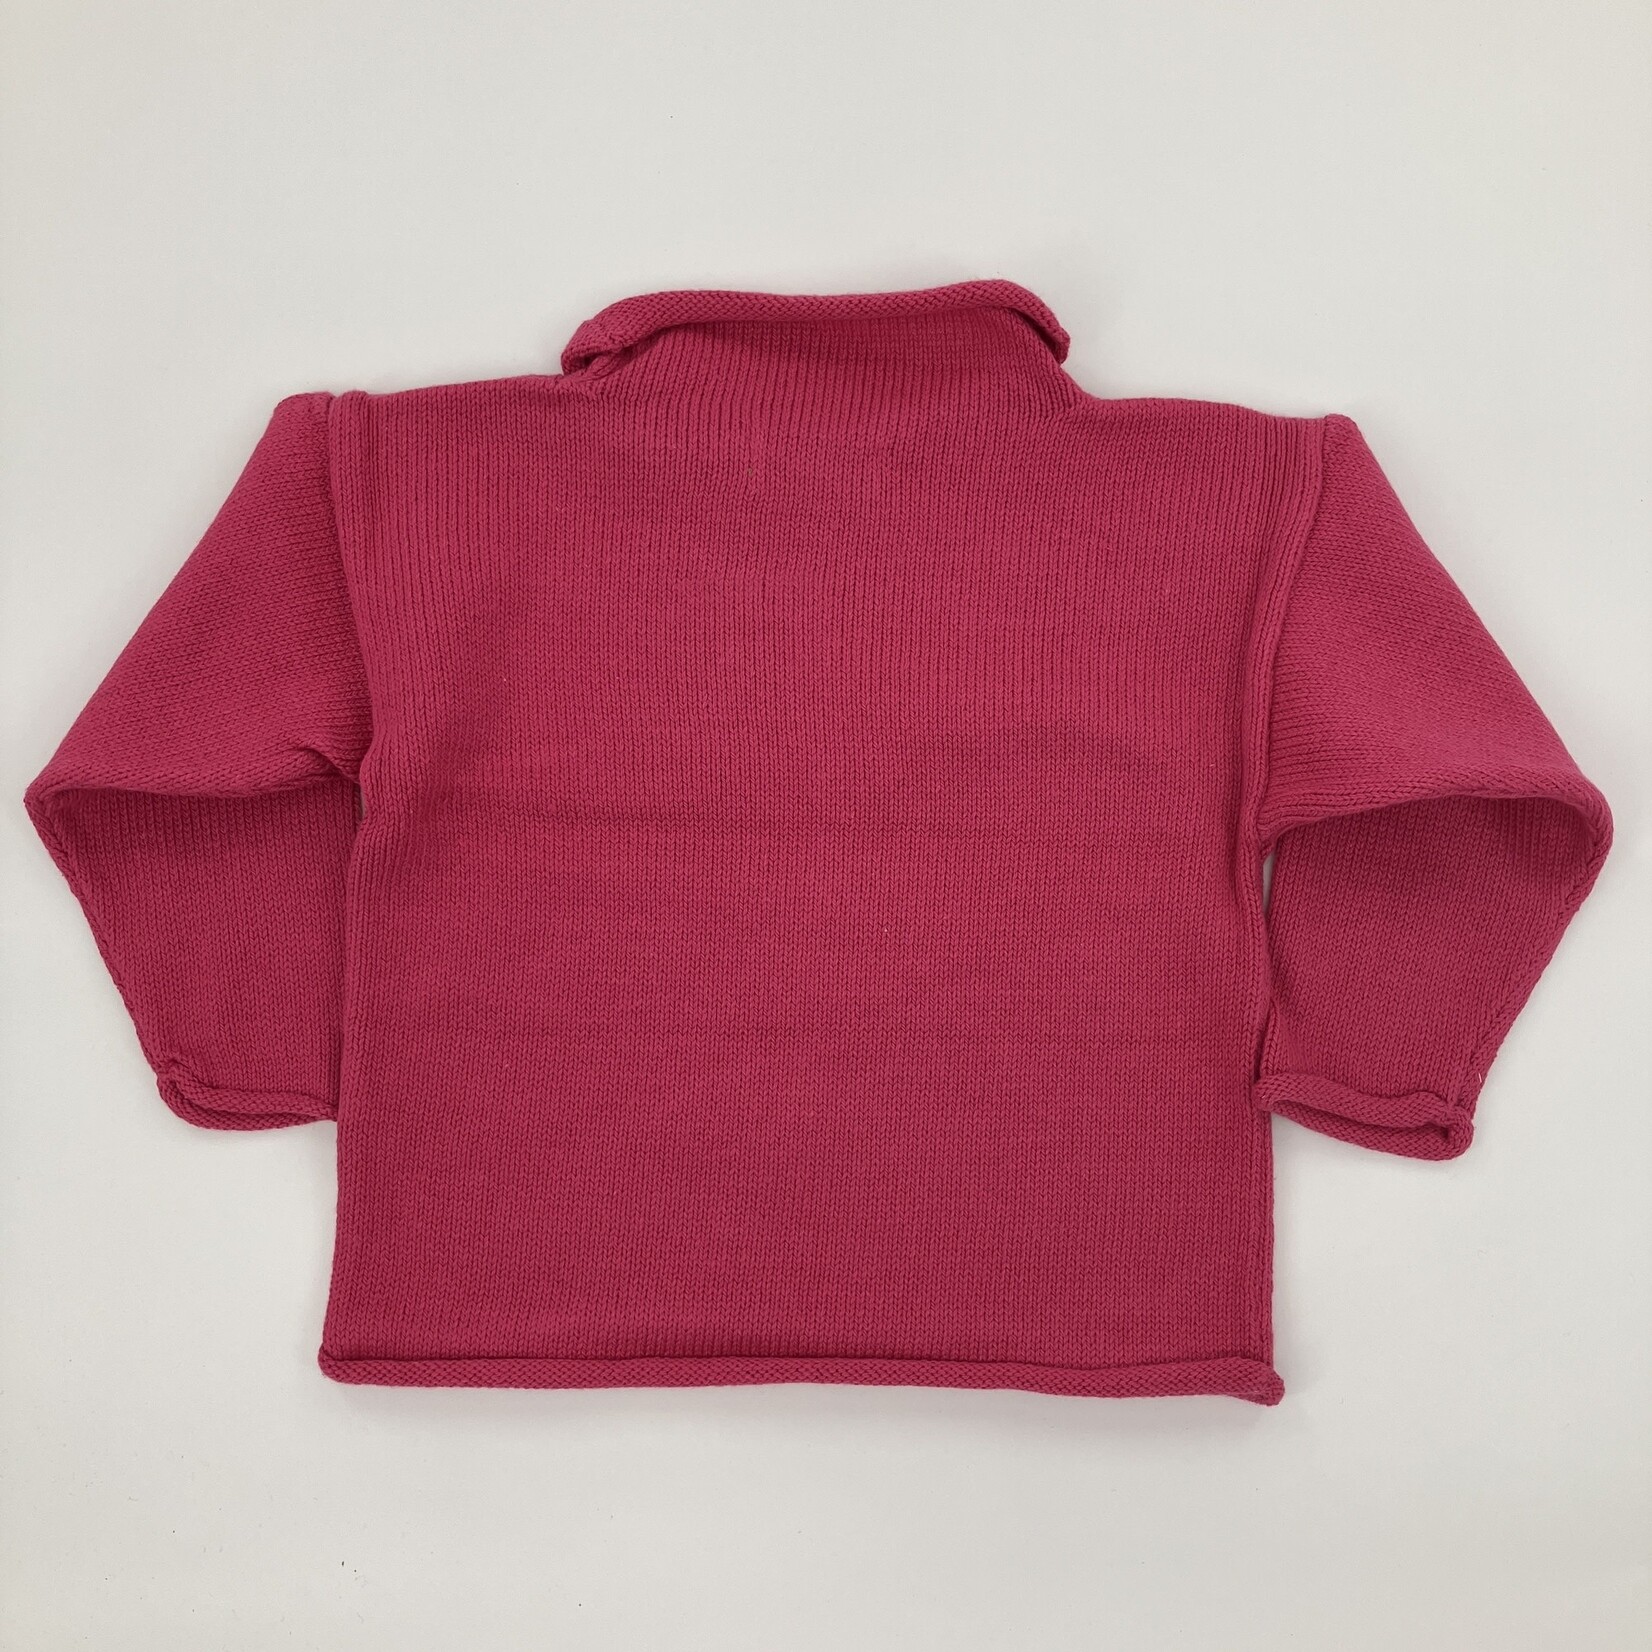 ACVISA/CLAVER Pink Sweater with Green Whale